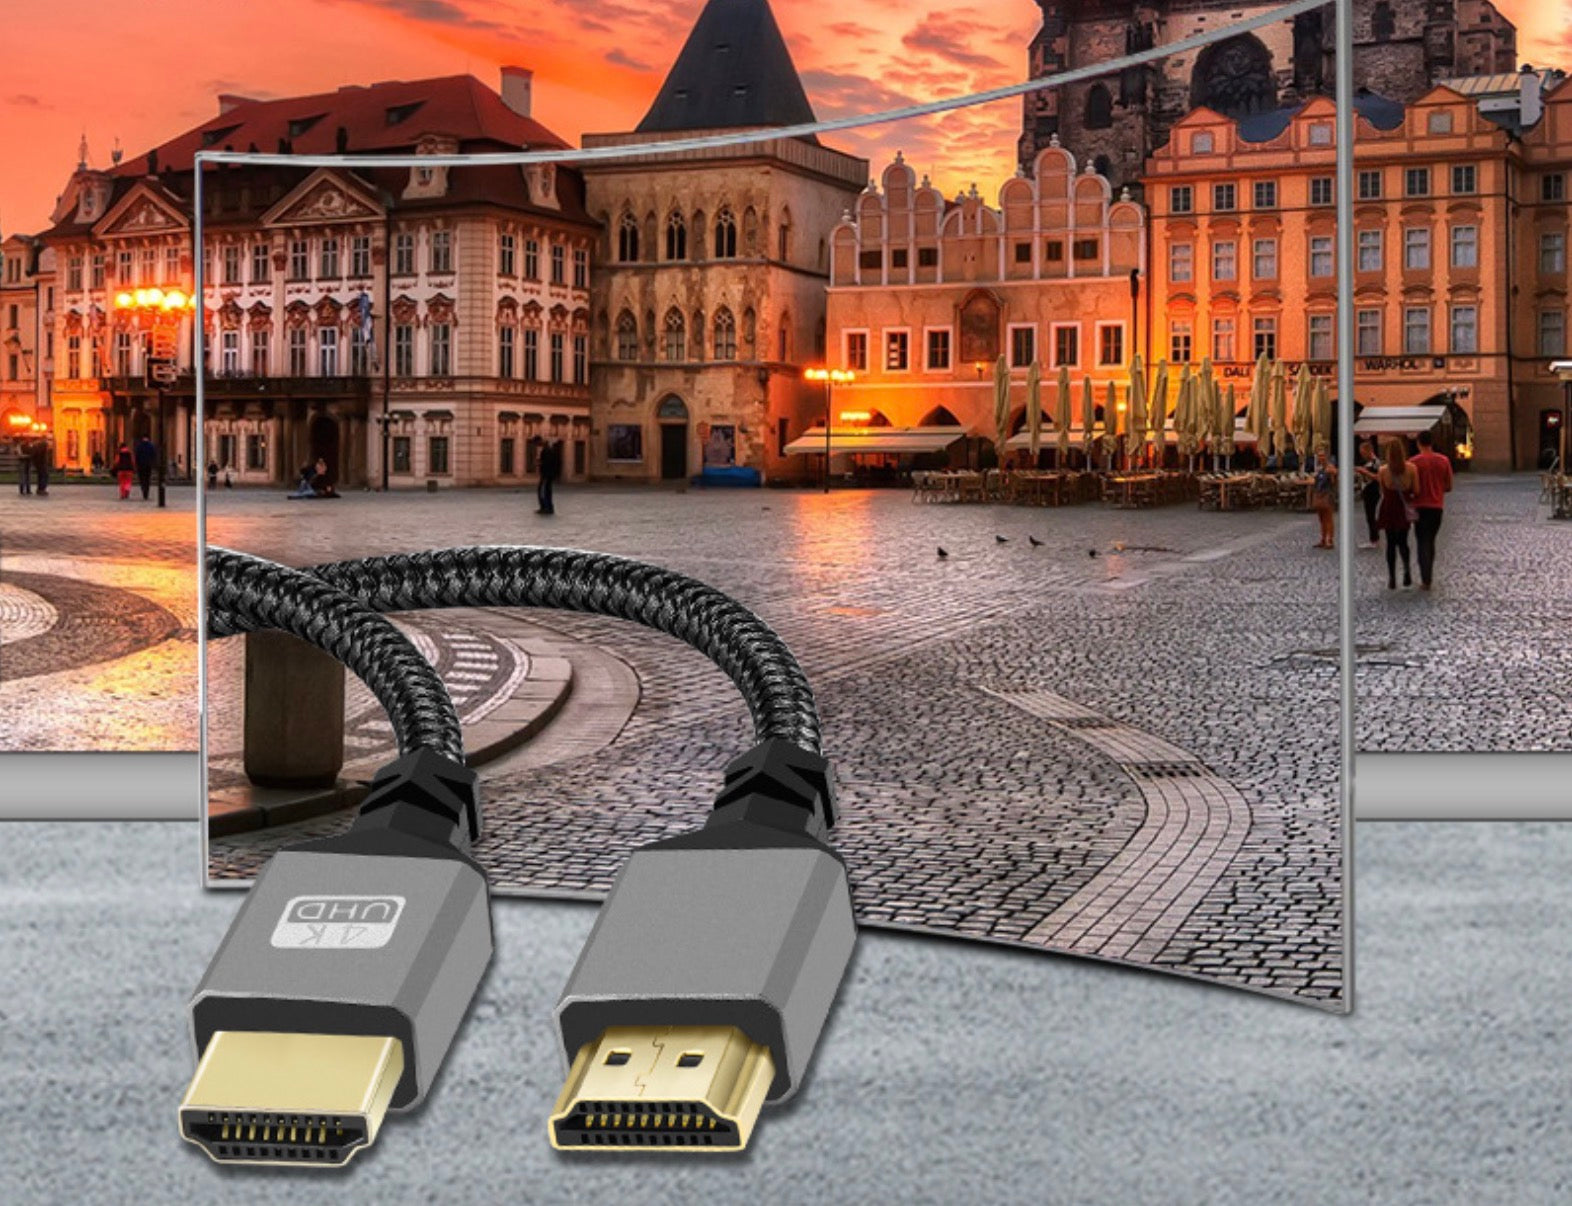 HDMI 2.0 4K@60Hz Male to Male Video braided Cable 0.3m